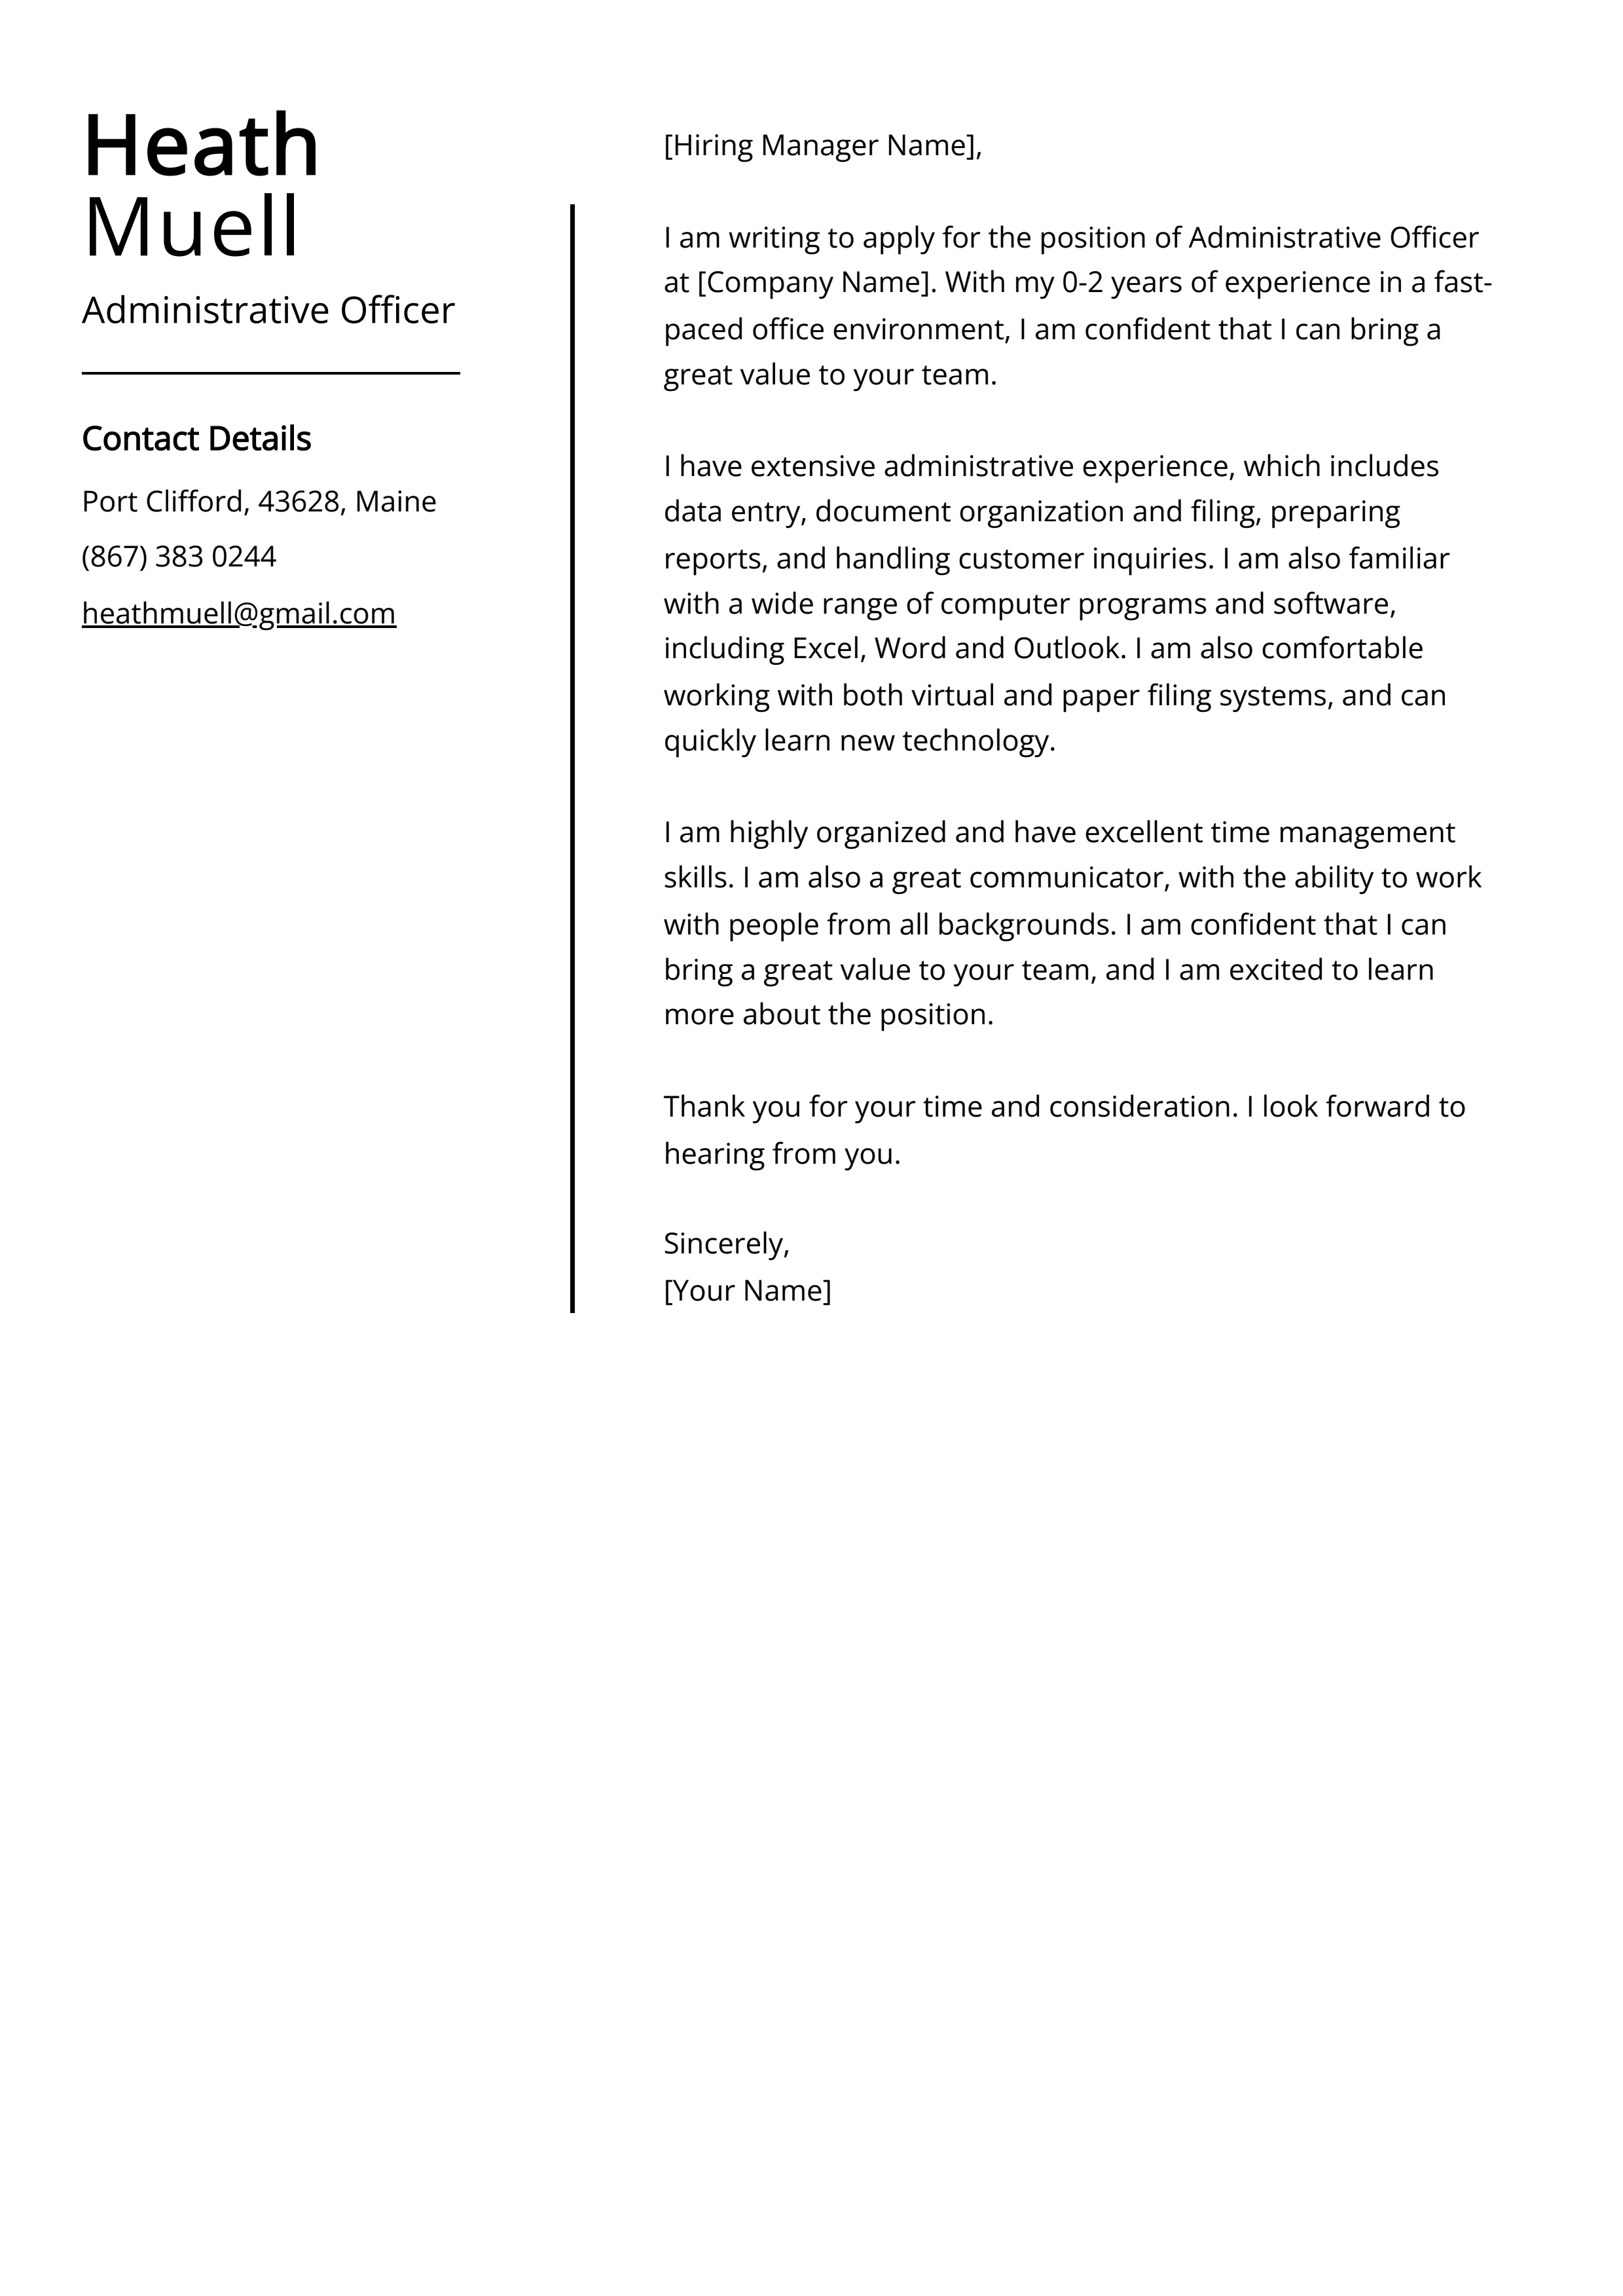 Administrative Officer Cover Letter Example